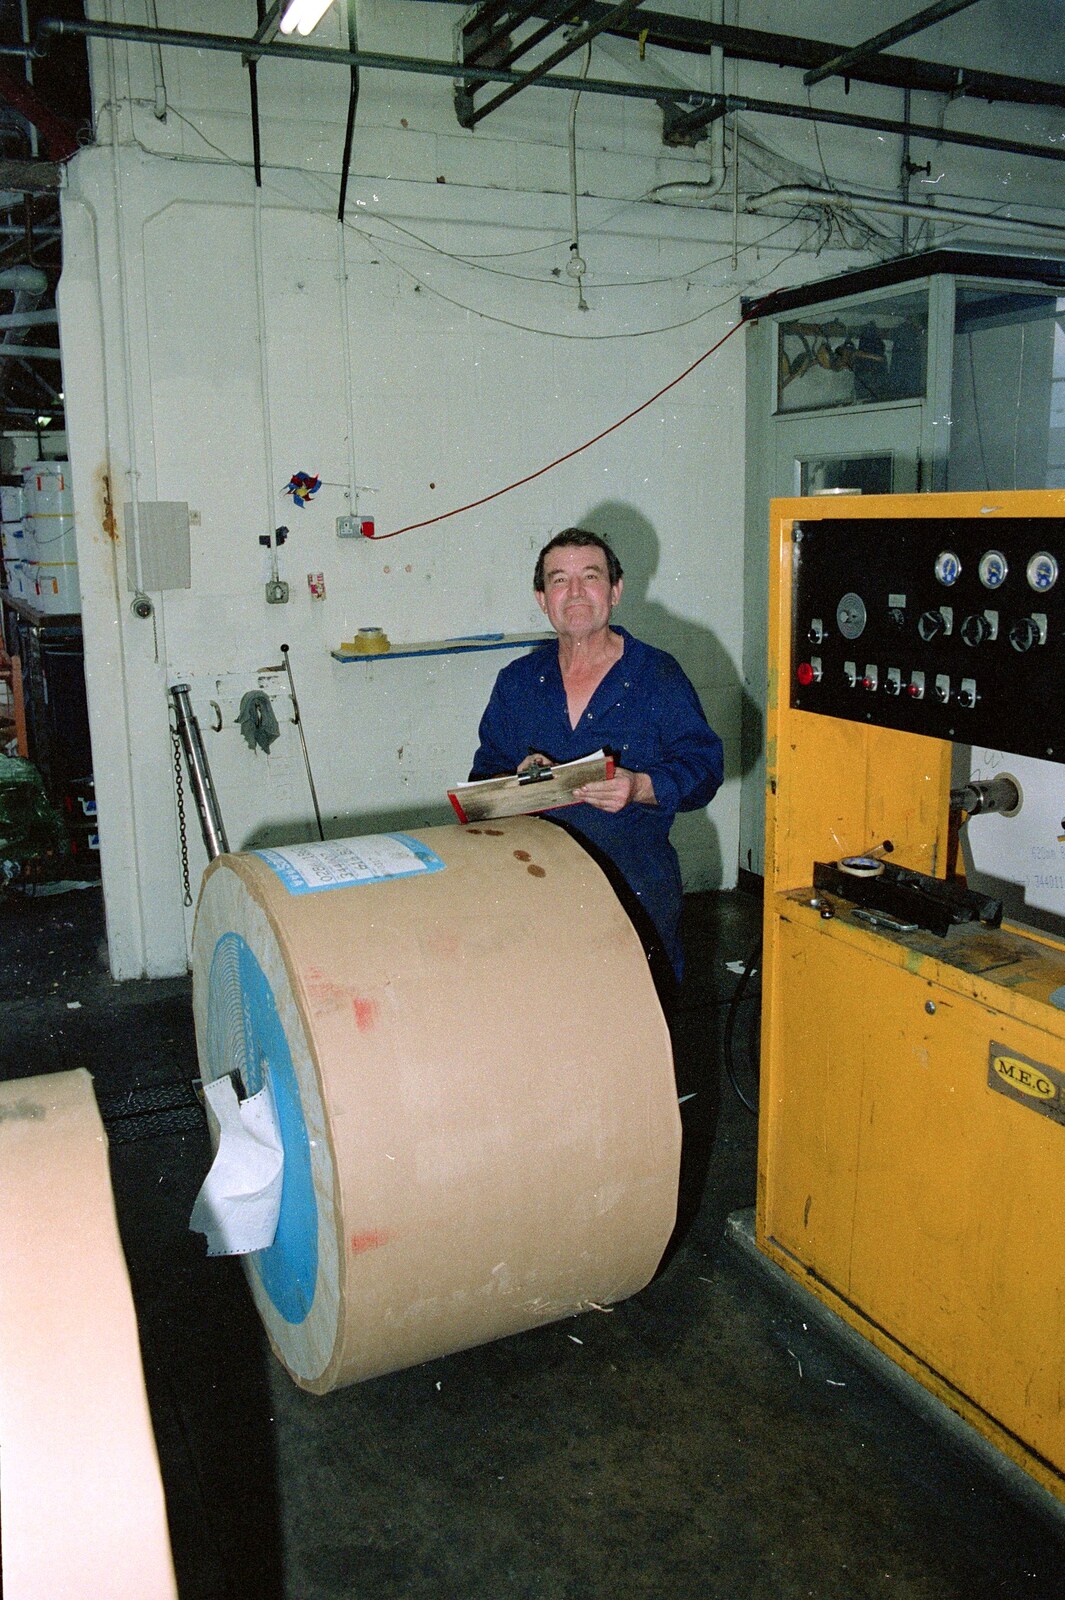 A reel of paper down in the warehouse from Nosher Leaves Soman-Wherry Press, Norwich - 3rd August 1988